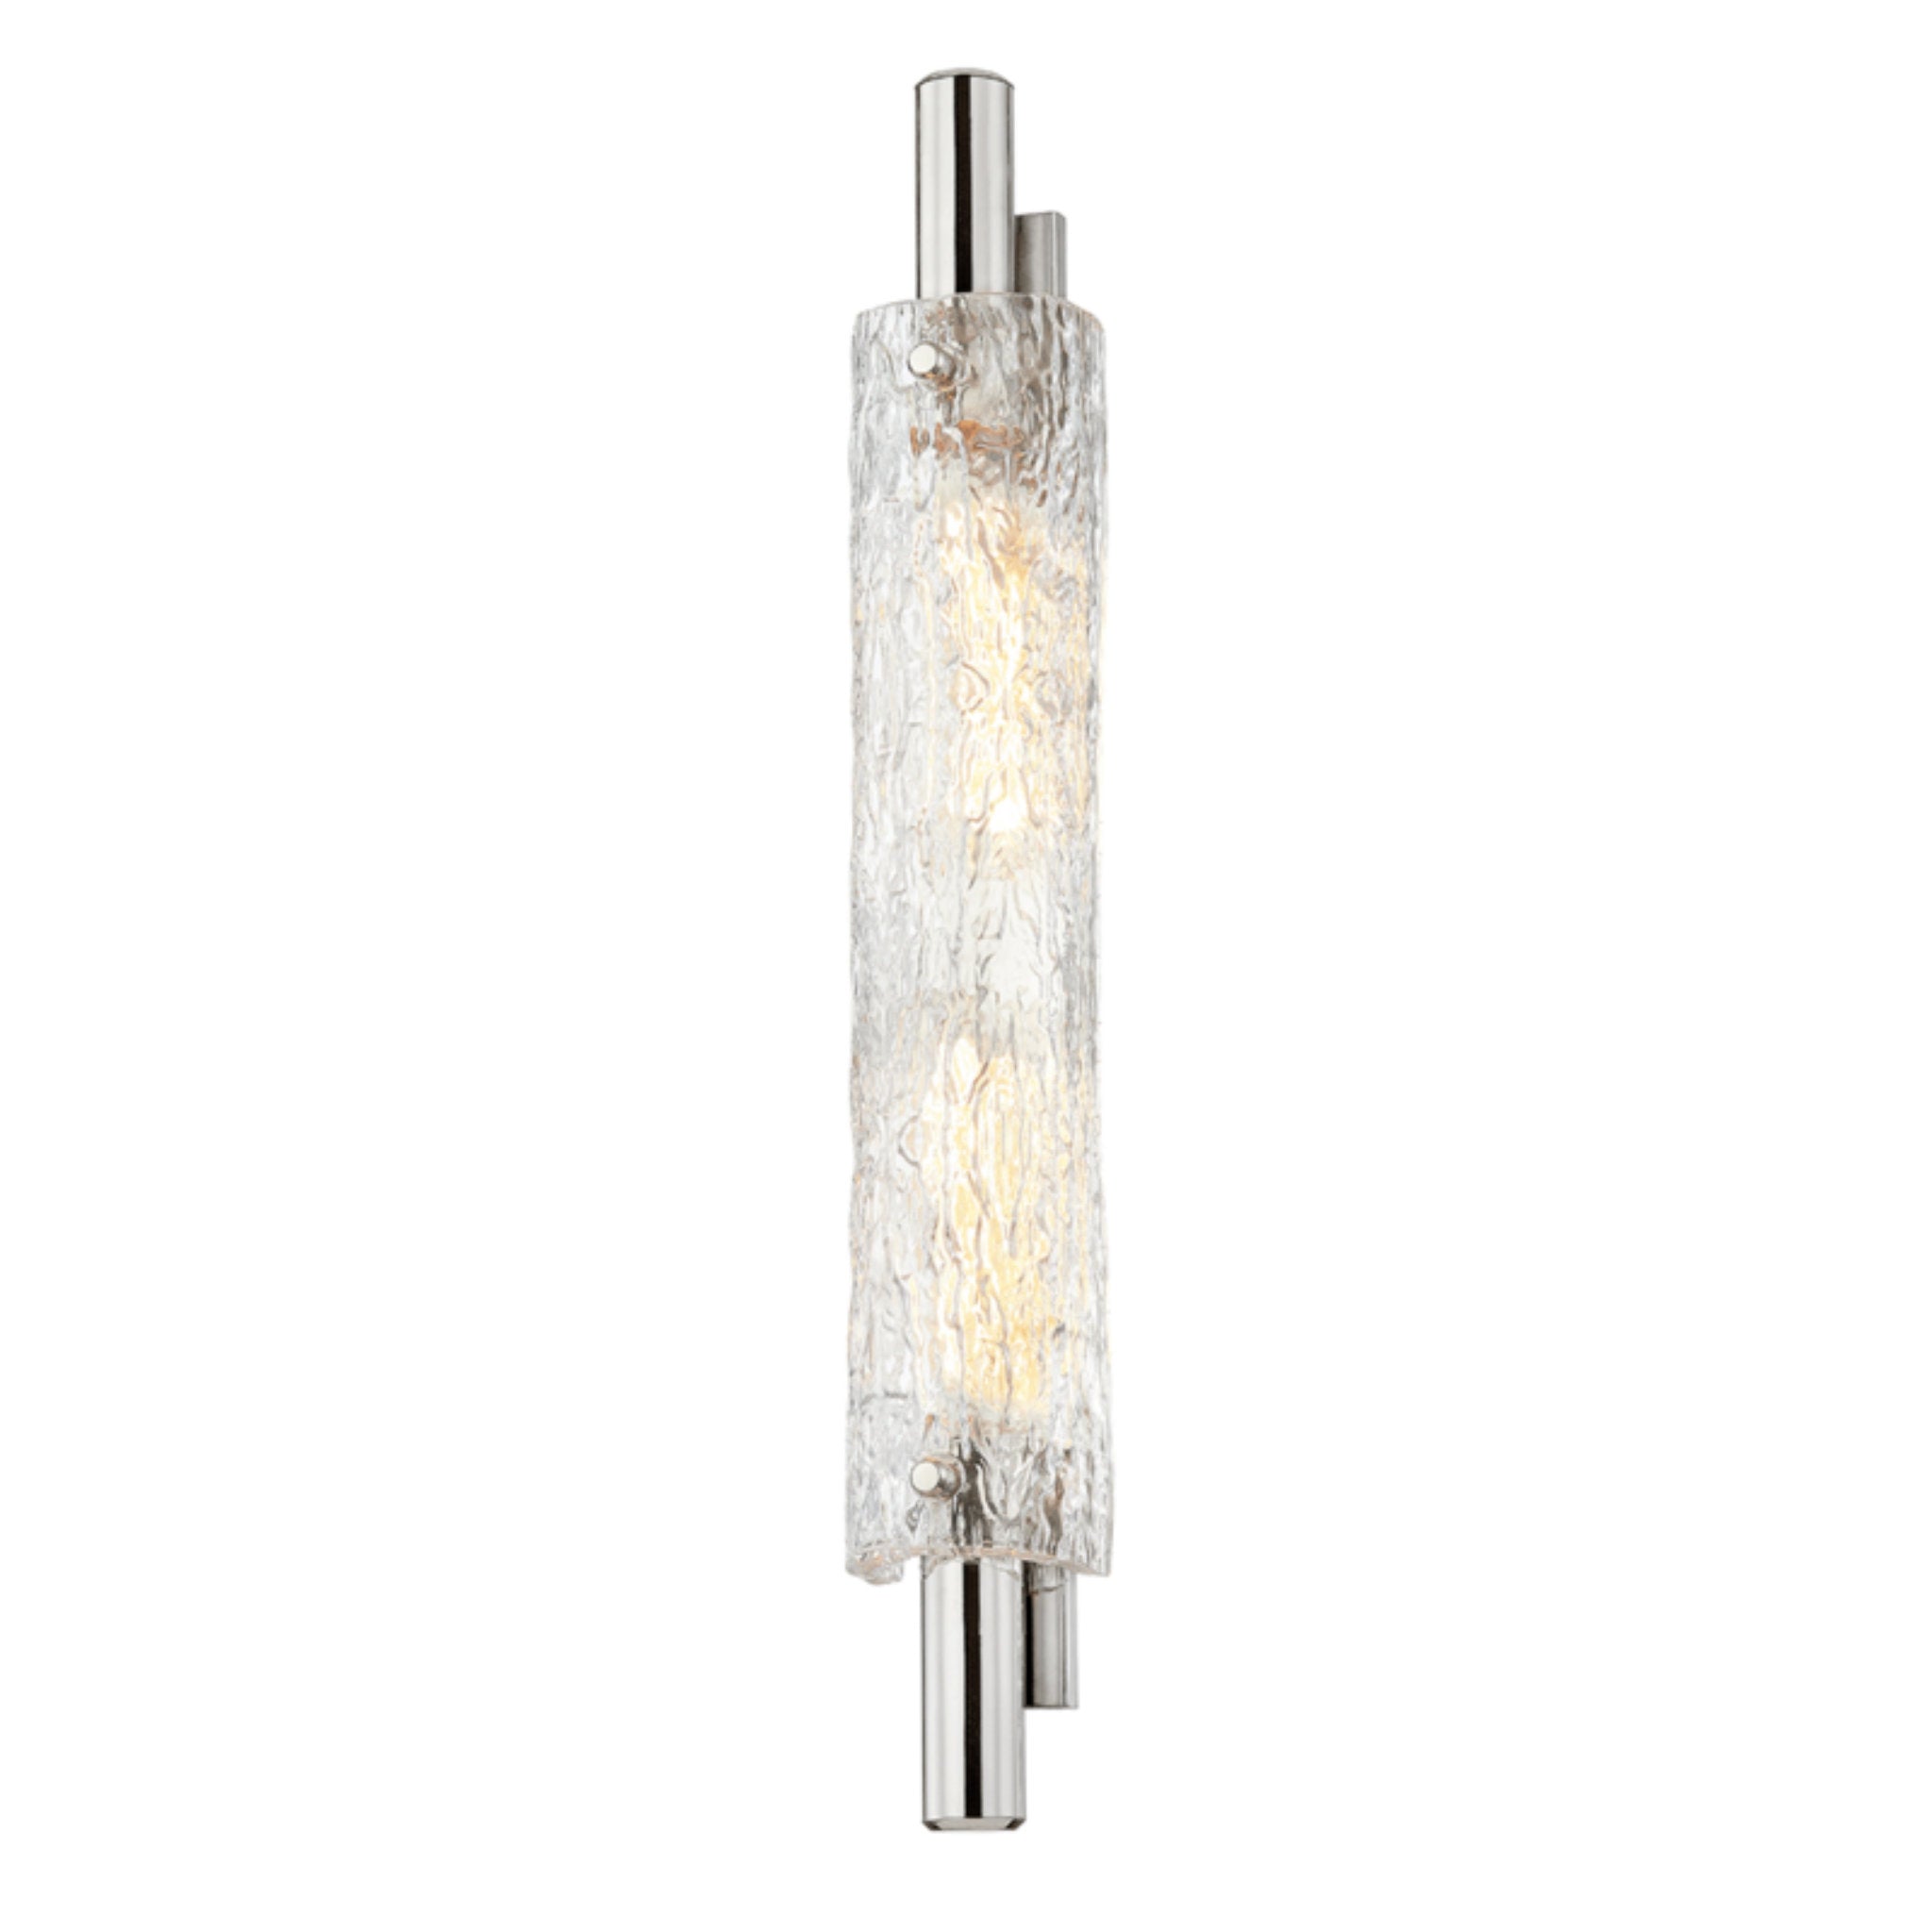 Harwich 2 Light Wall Sconce in Polished Nickel